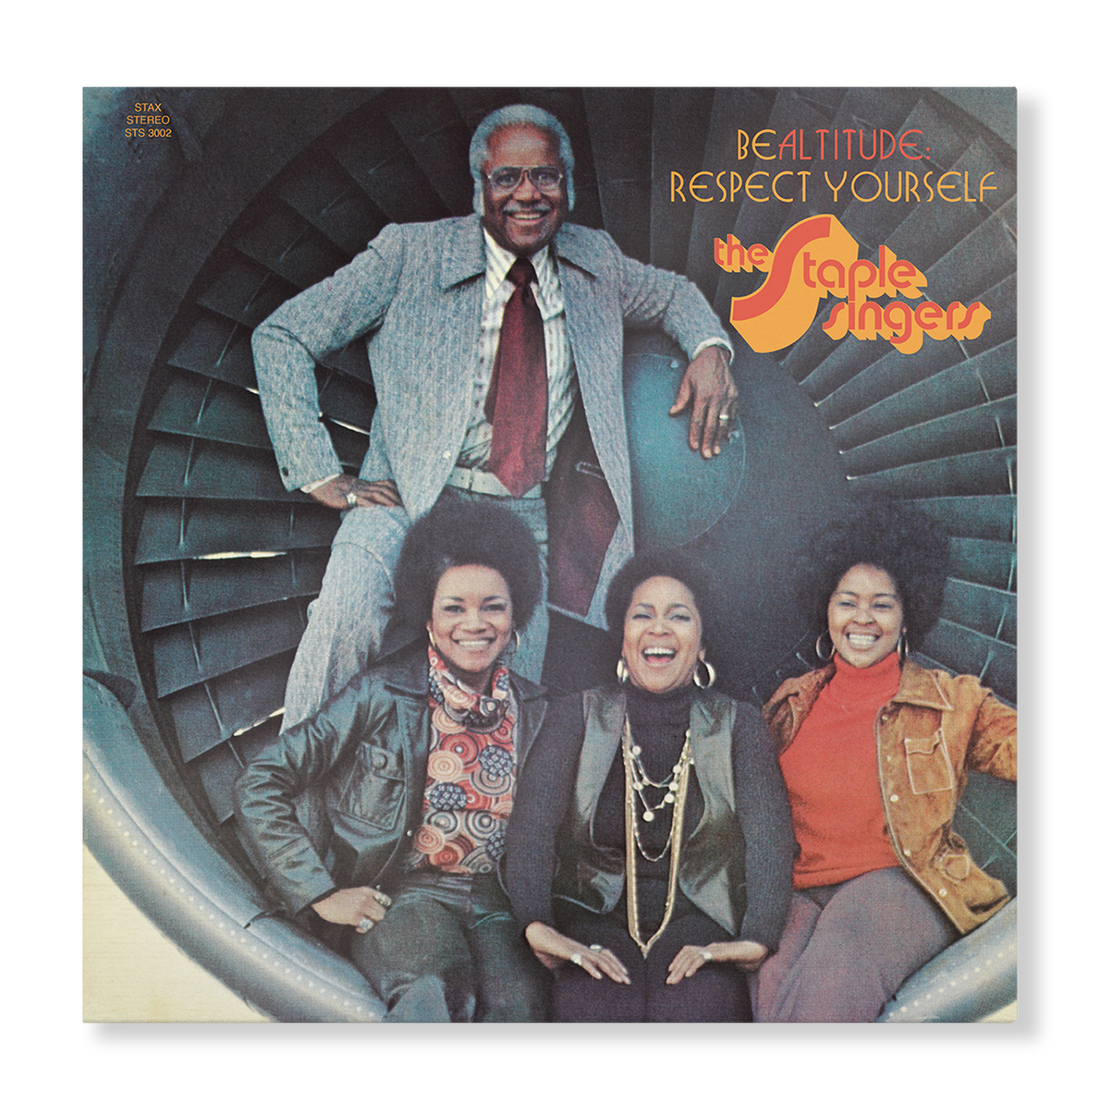 THE STAPLE SINGERS - BE ALTITUDE: RESPECT YOURSELF - 50TH ANNIVERSARY EDITION - VINYL LP